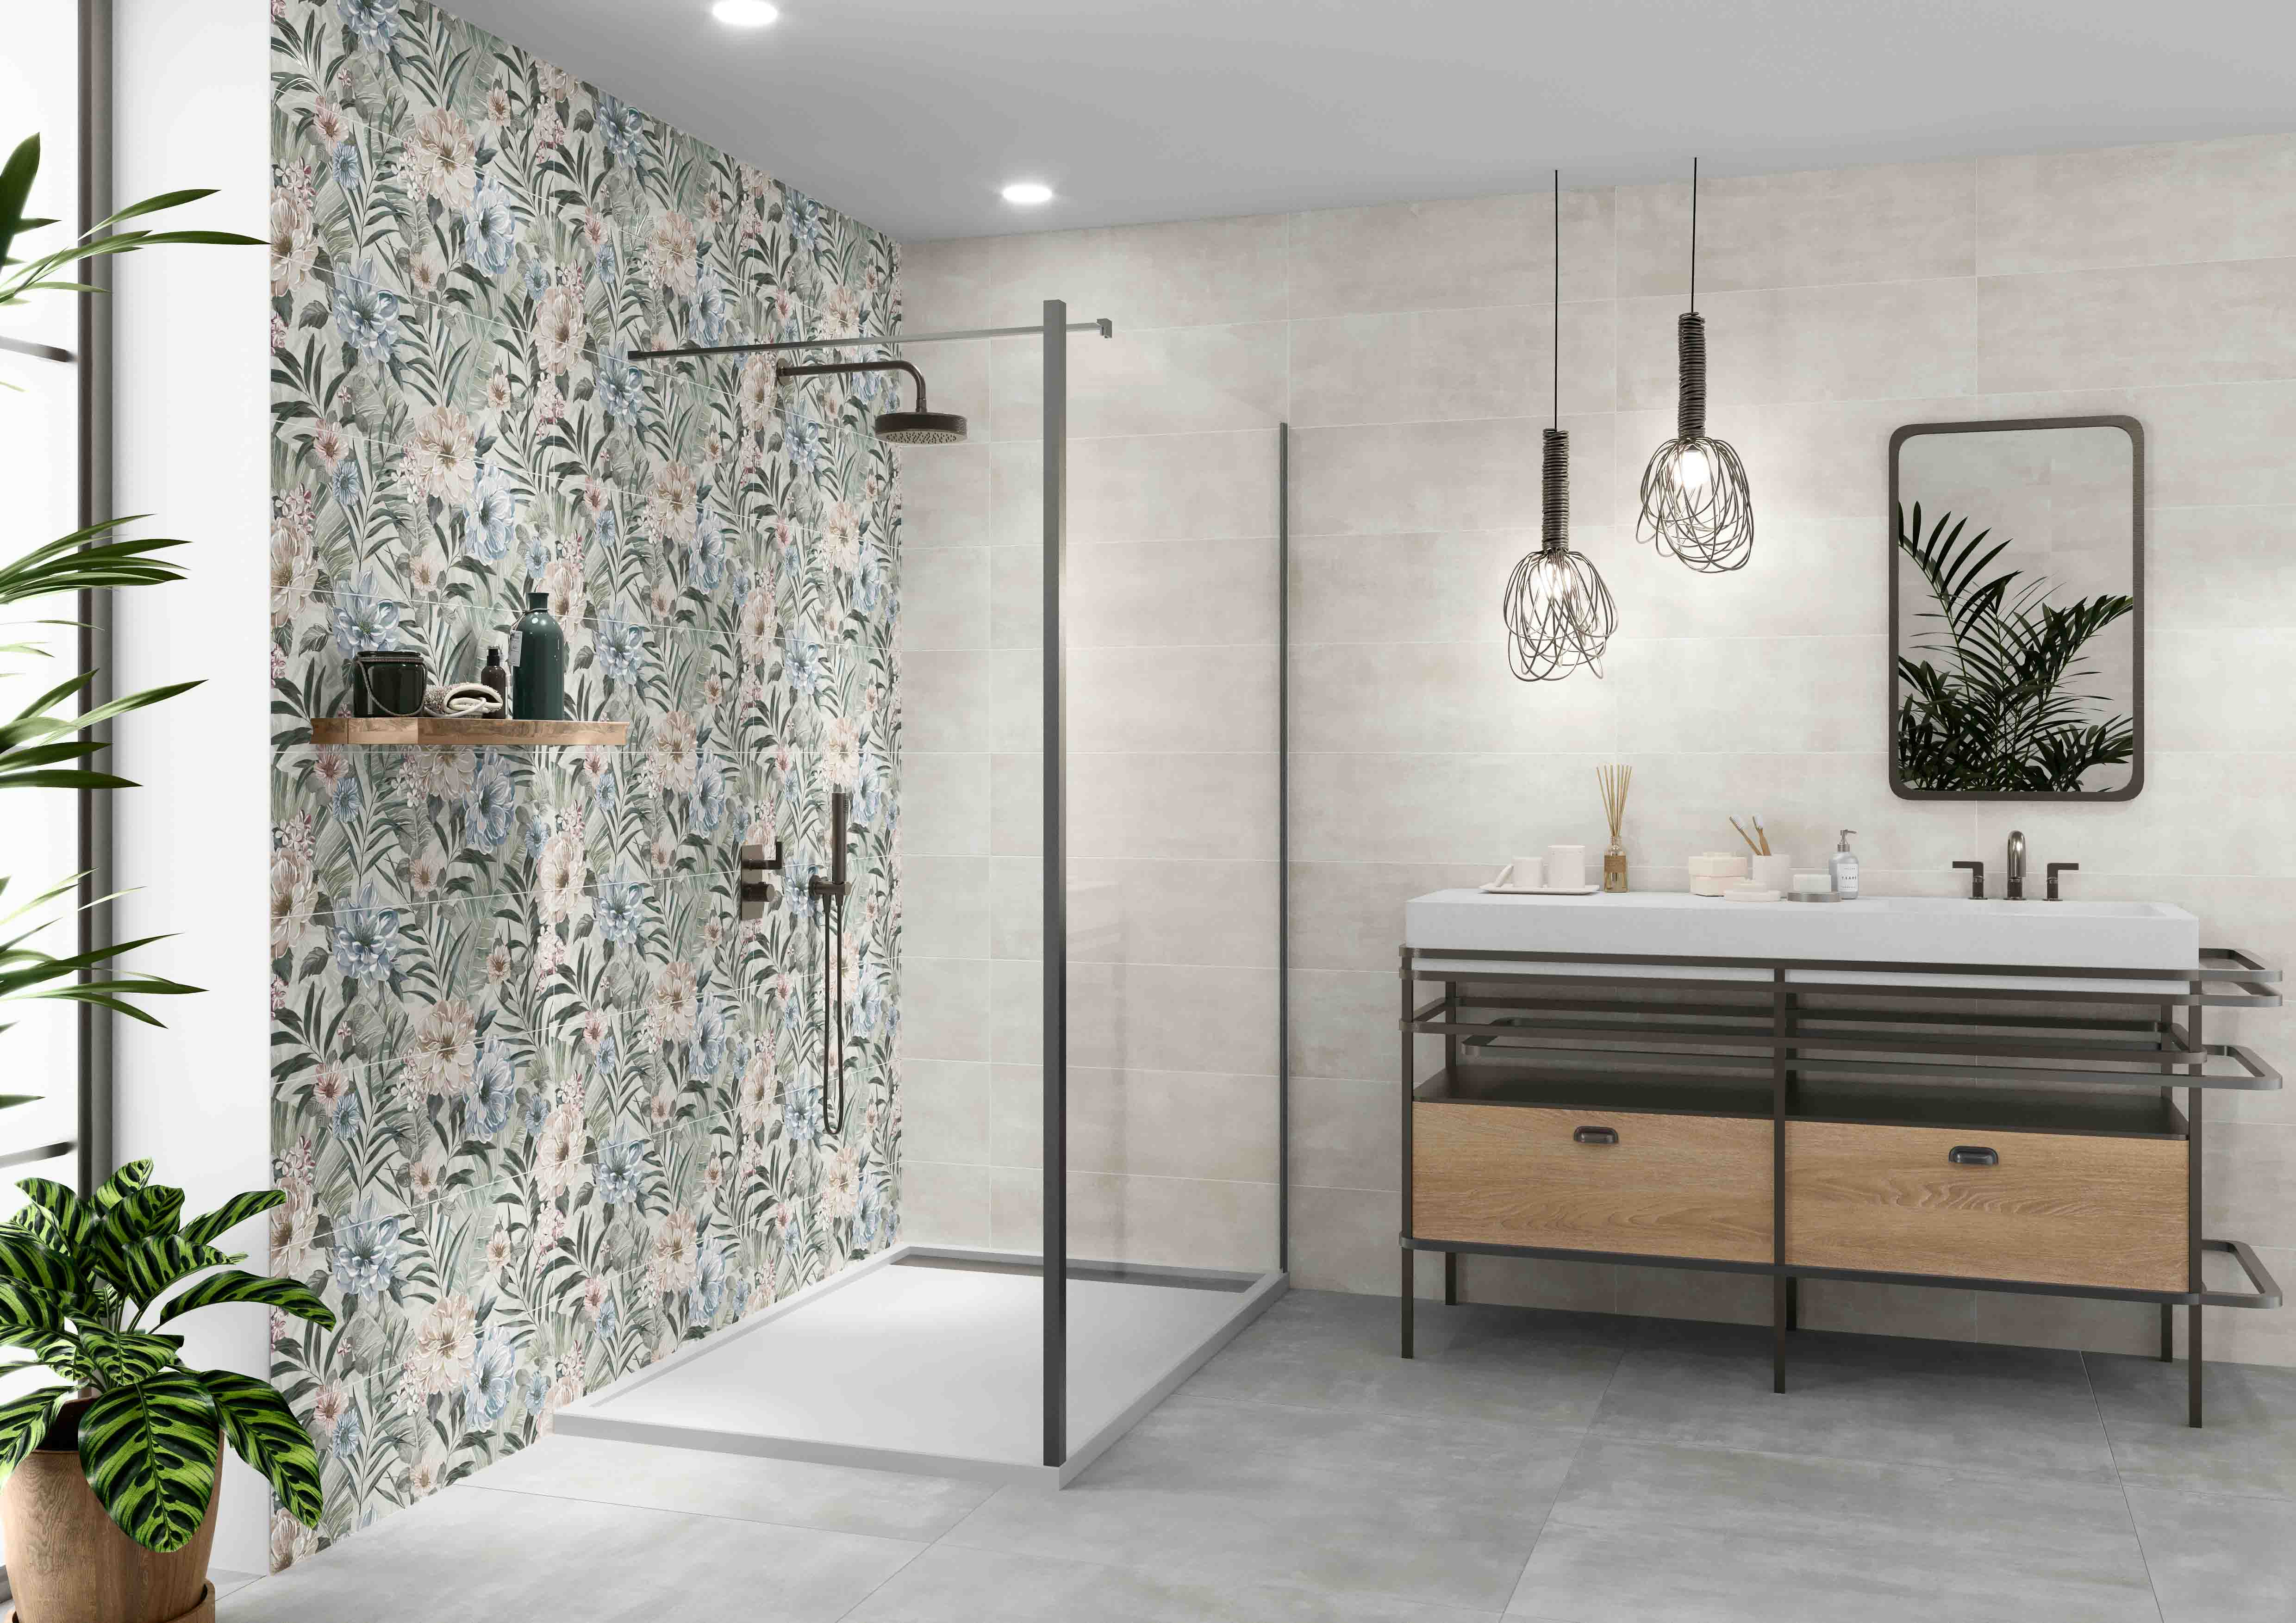 Bloom Ice decoration MorePlus series by Paul Ceramiche
